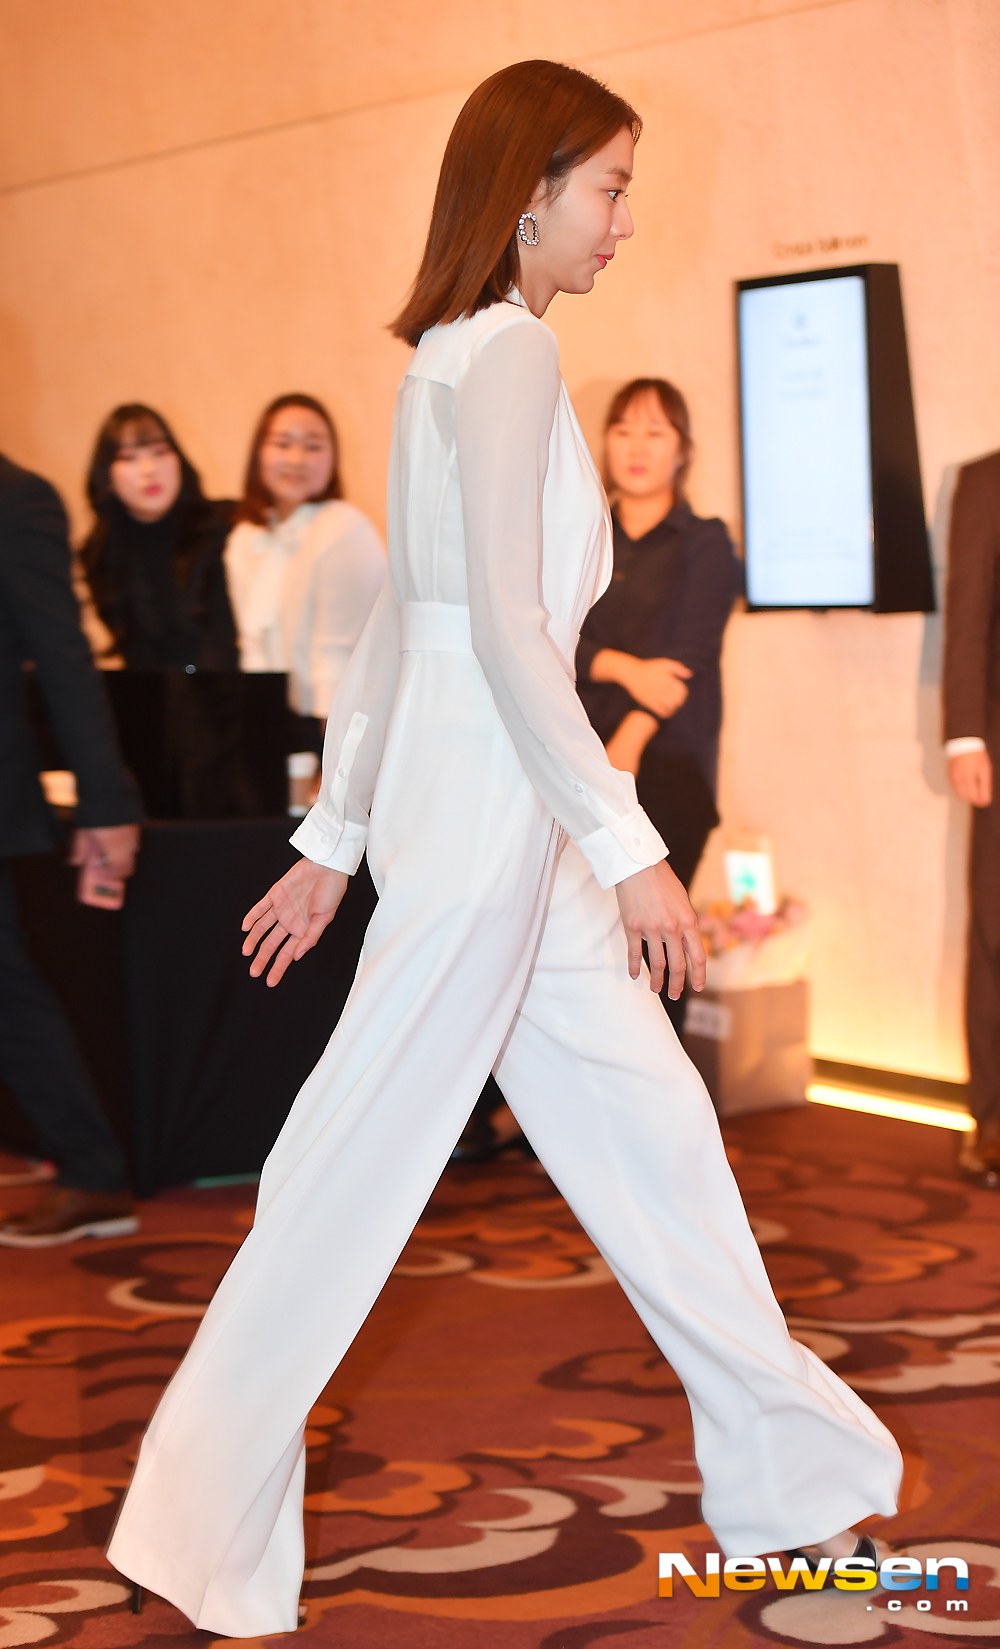 Actor Uee attended a photo wall event launching cosmetics at the Banyan Tree Club & Spa Seoul Crystal Ballroom in Jangchung-dong, Jung-gu, Seoul on November 28th.Uee is responding to the photo pose on the day.